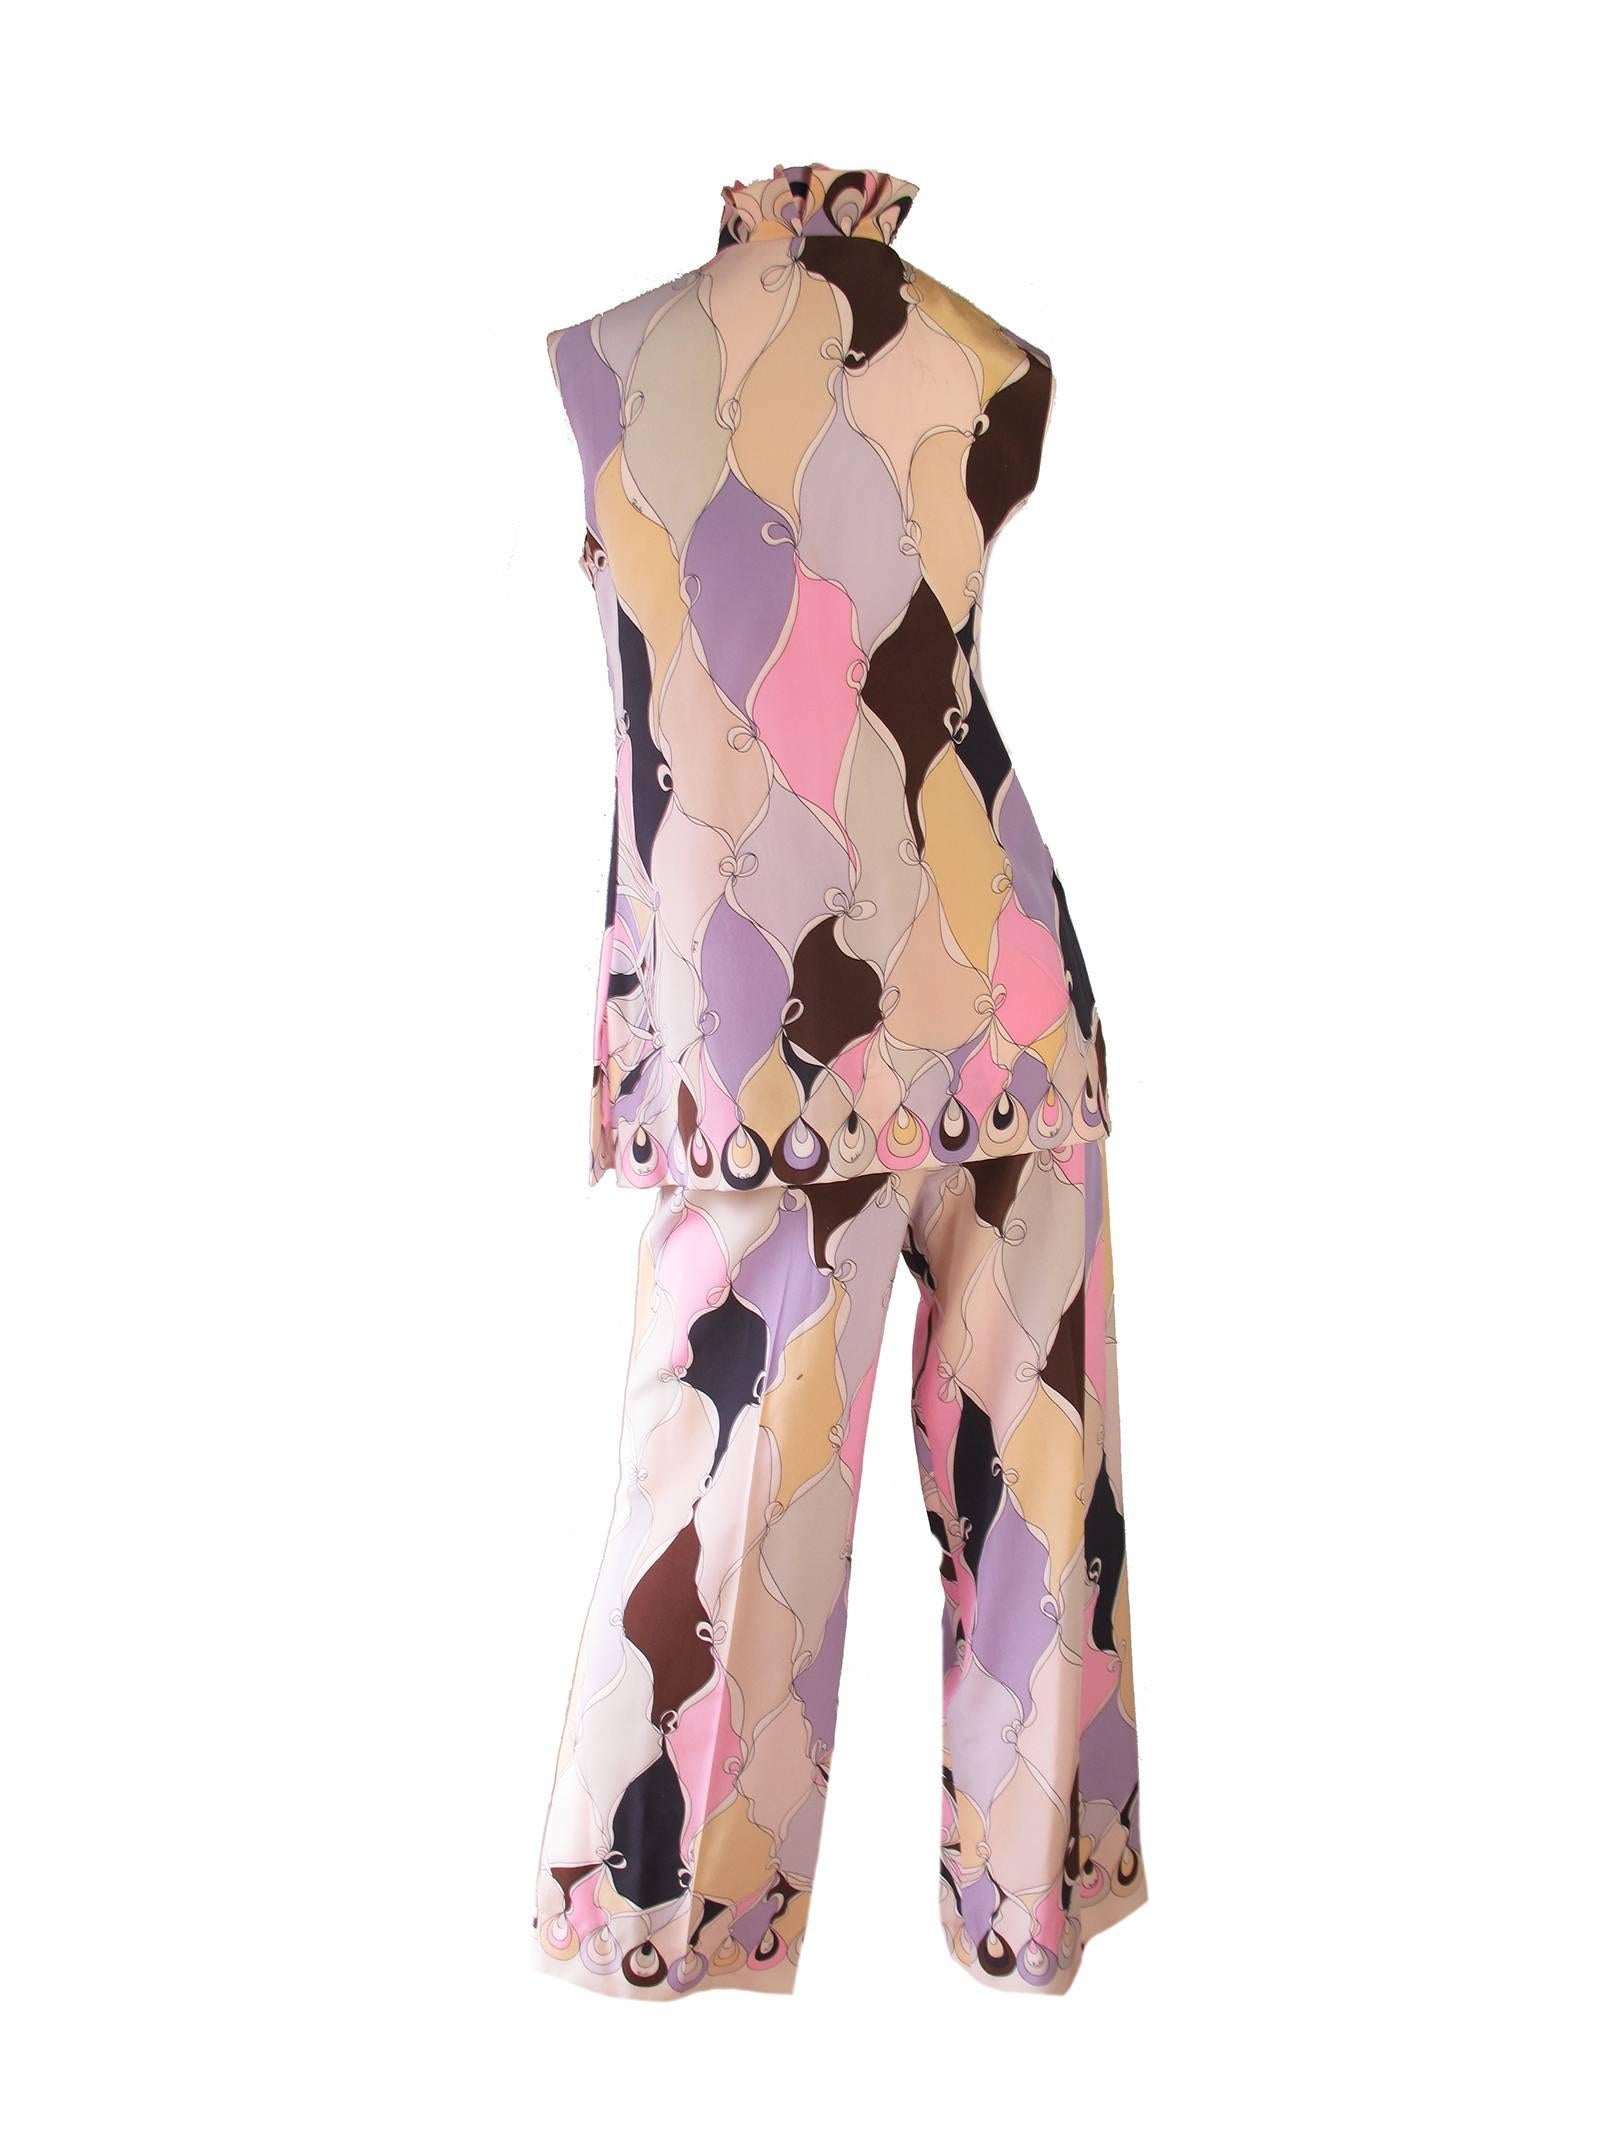 1960s silk printed Pucci set.  Condition: Excellent. Size US 6 / vintage Pucci 10
we accept returns for refund, please see our terms, we offer free ground shipping within the US